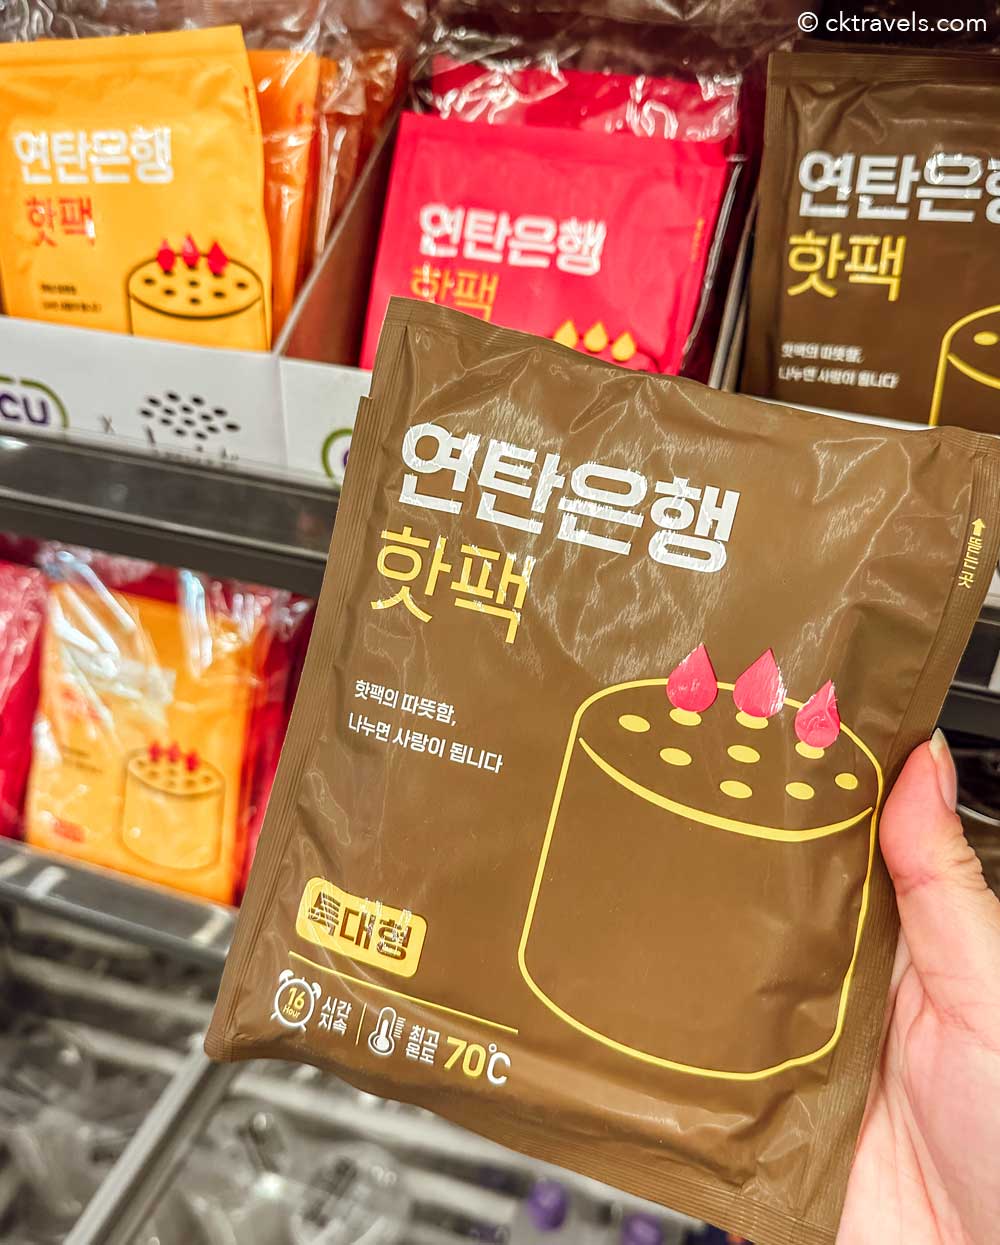 Hand hot packs from CU convenience stores in South Korea